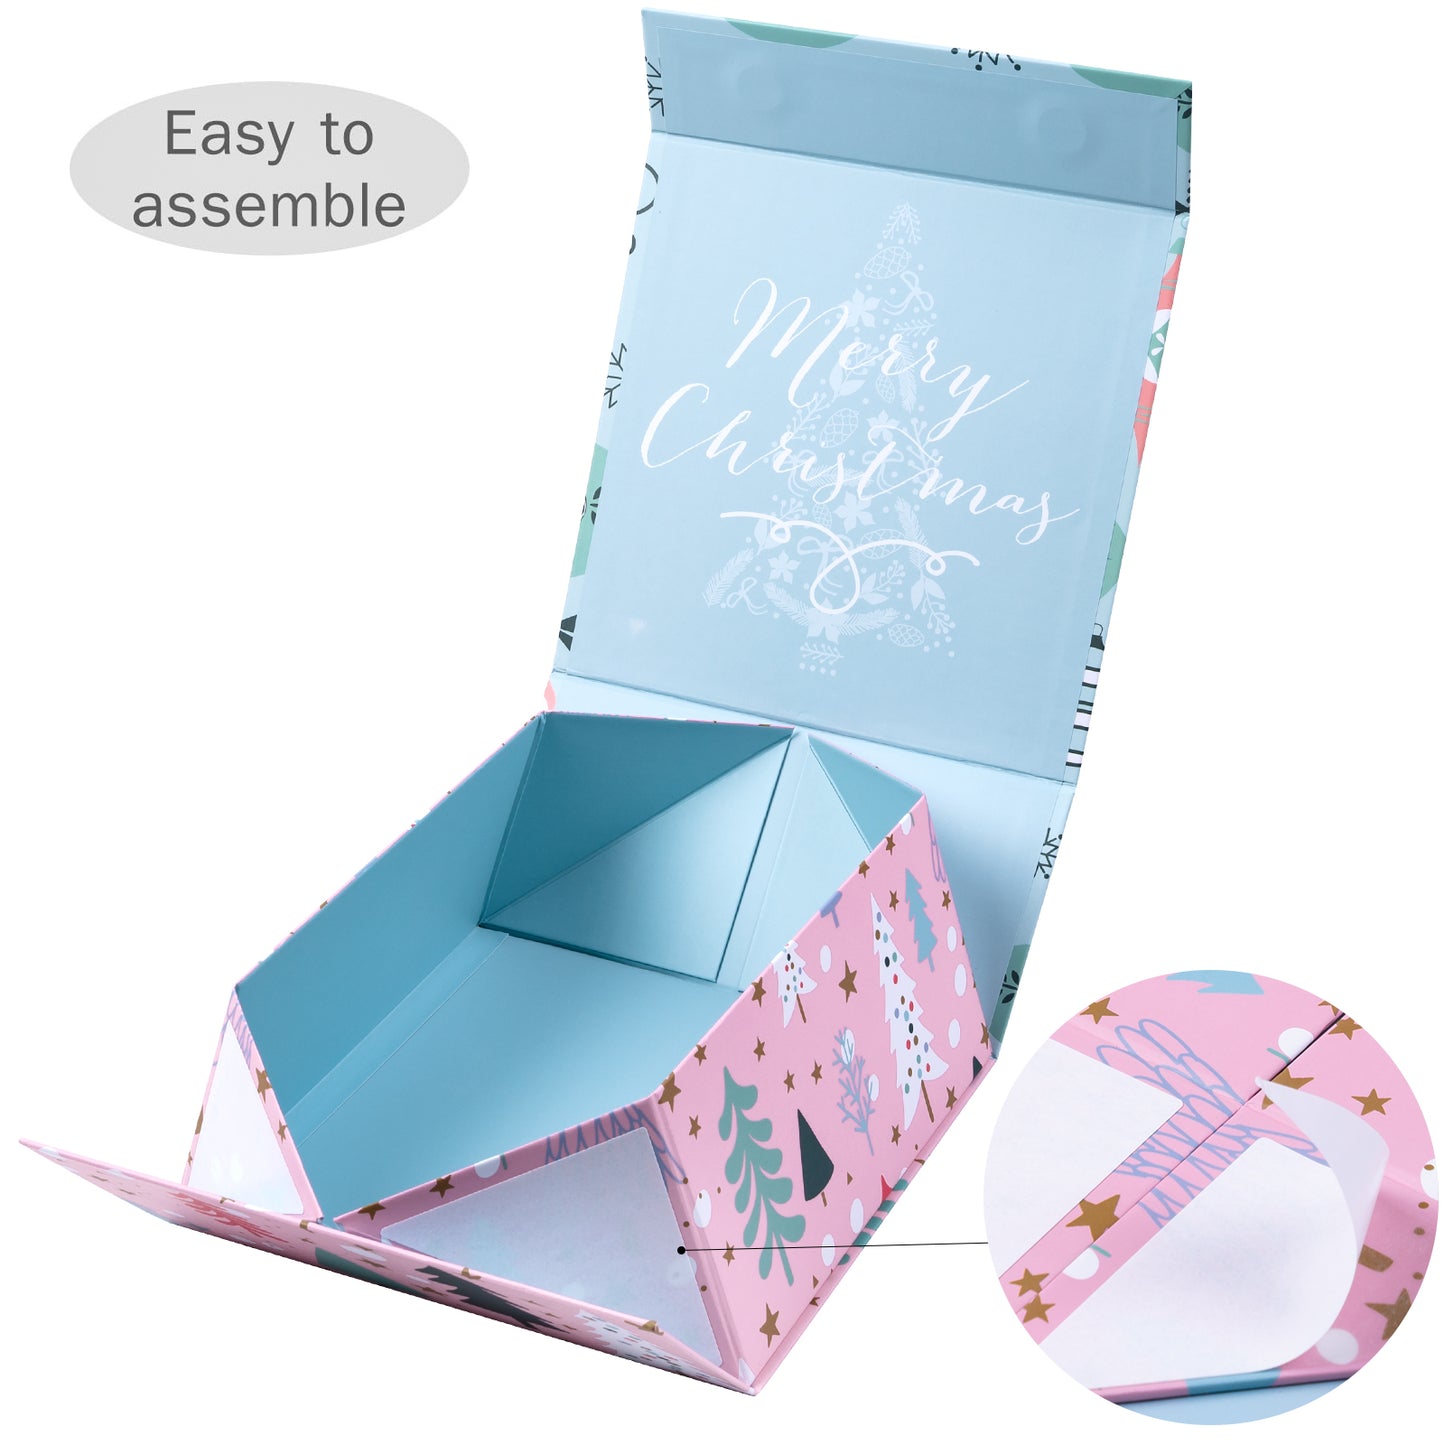 20x20x10cm Collapsible Gift Box Magnetic Closure Pink & Blue Wedding Party Wrapping